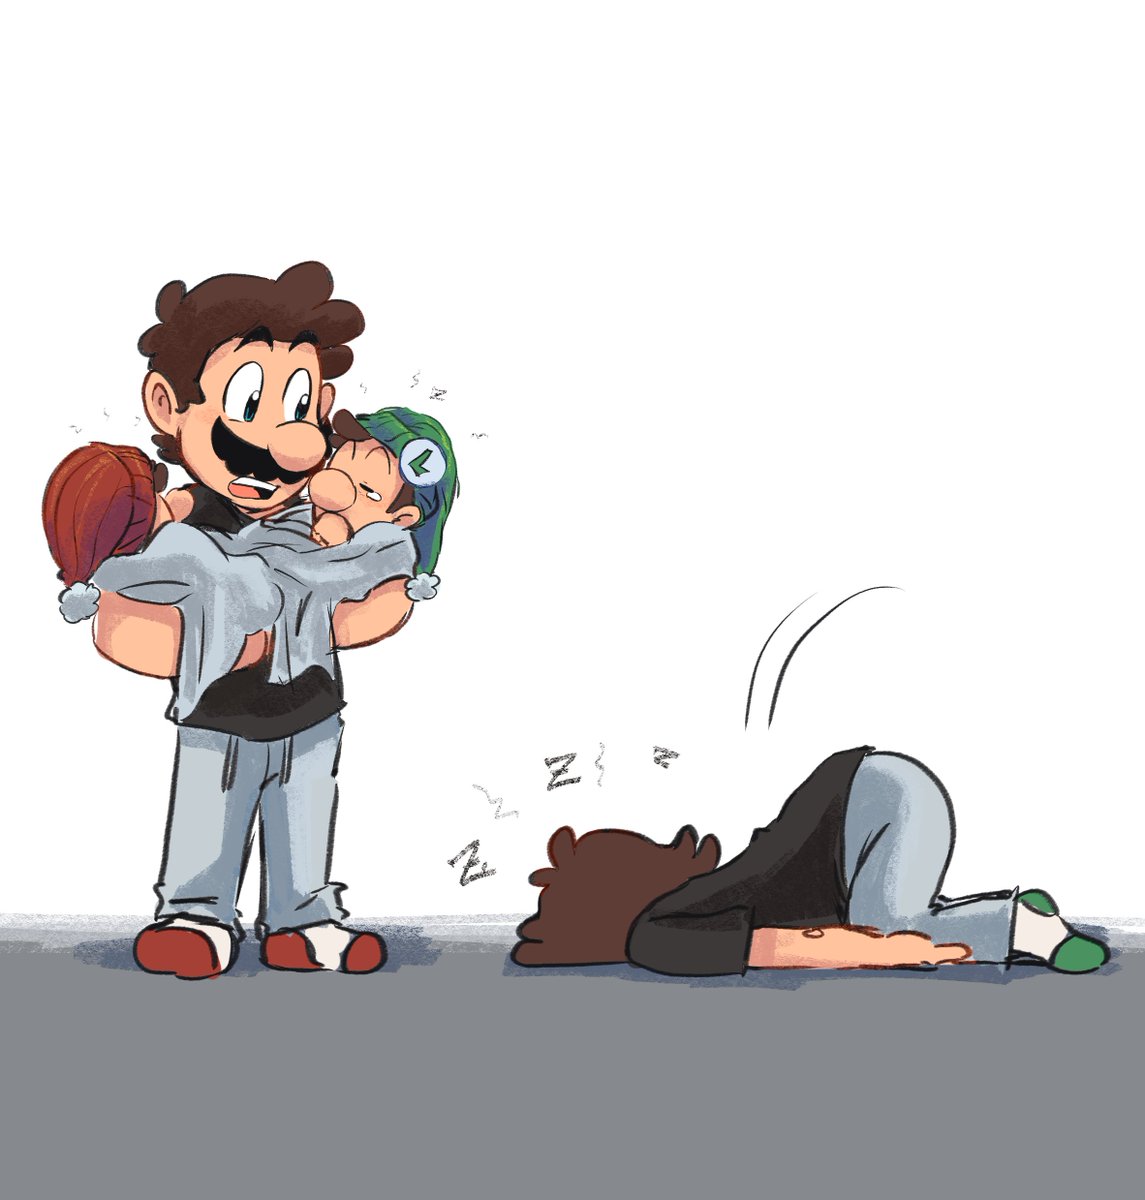 🎵Lullaby
(I finally redrew this oh my god I've been getting notifs for this almost 2 year old tweet recently so I acted on my repulsive thoughts of the art style ((it didn't change much but whatever)))
#mario #luigi #babymario #babyluigi